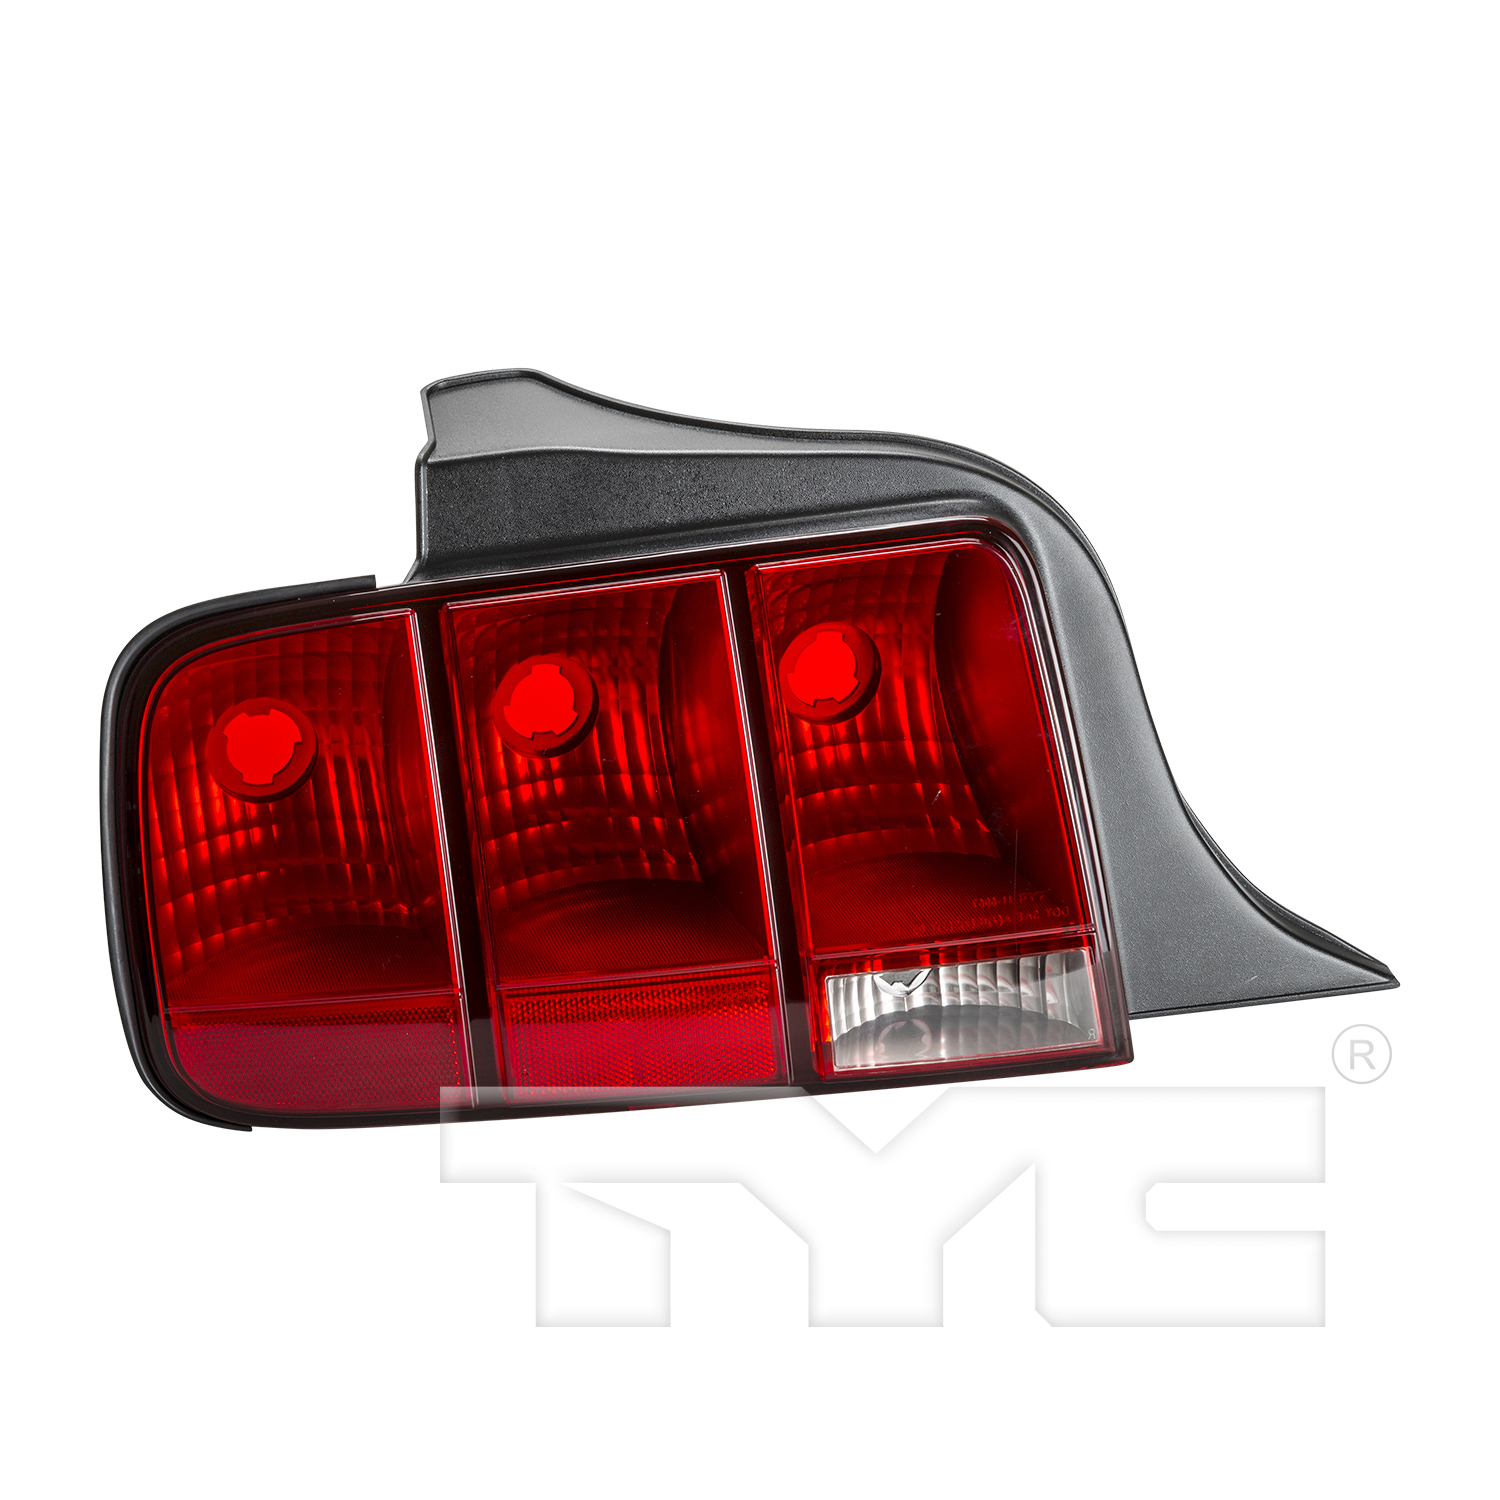 Aftermarket TAILLIGHTS for FORD - MUSTANG, MUSTANG,05-09,LT Taillamp assy